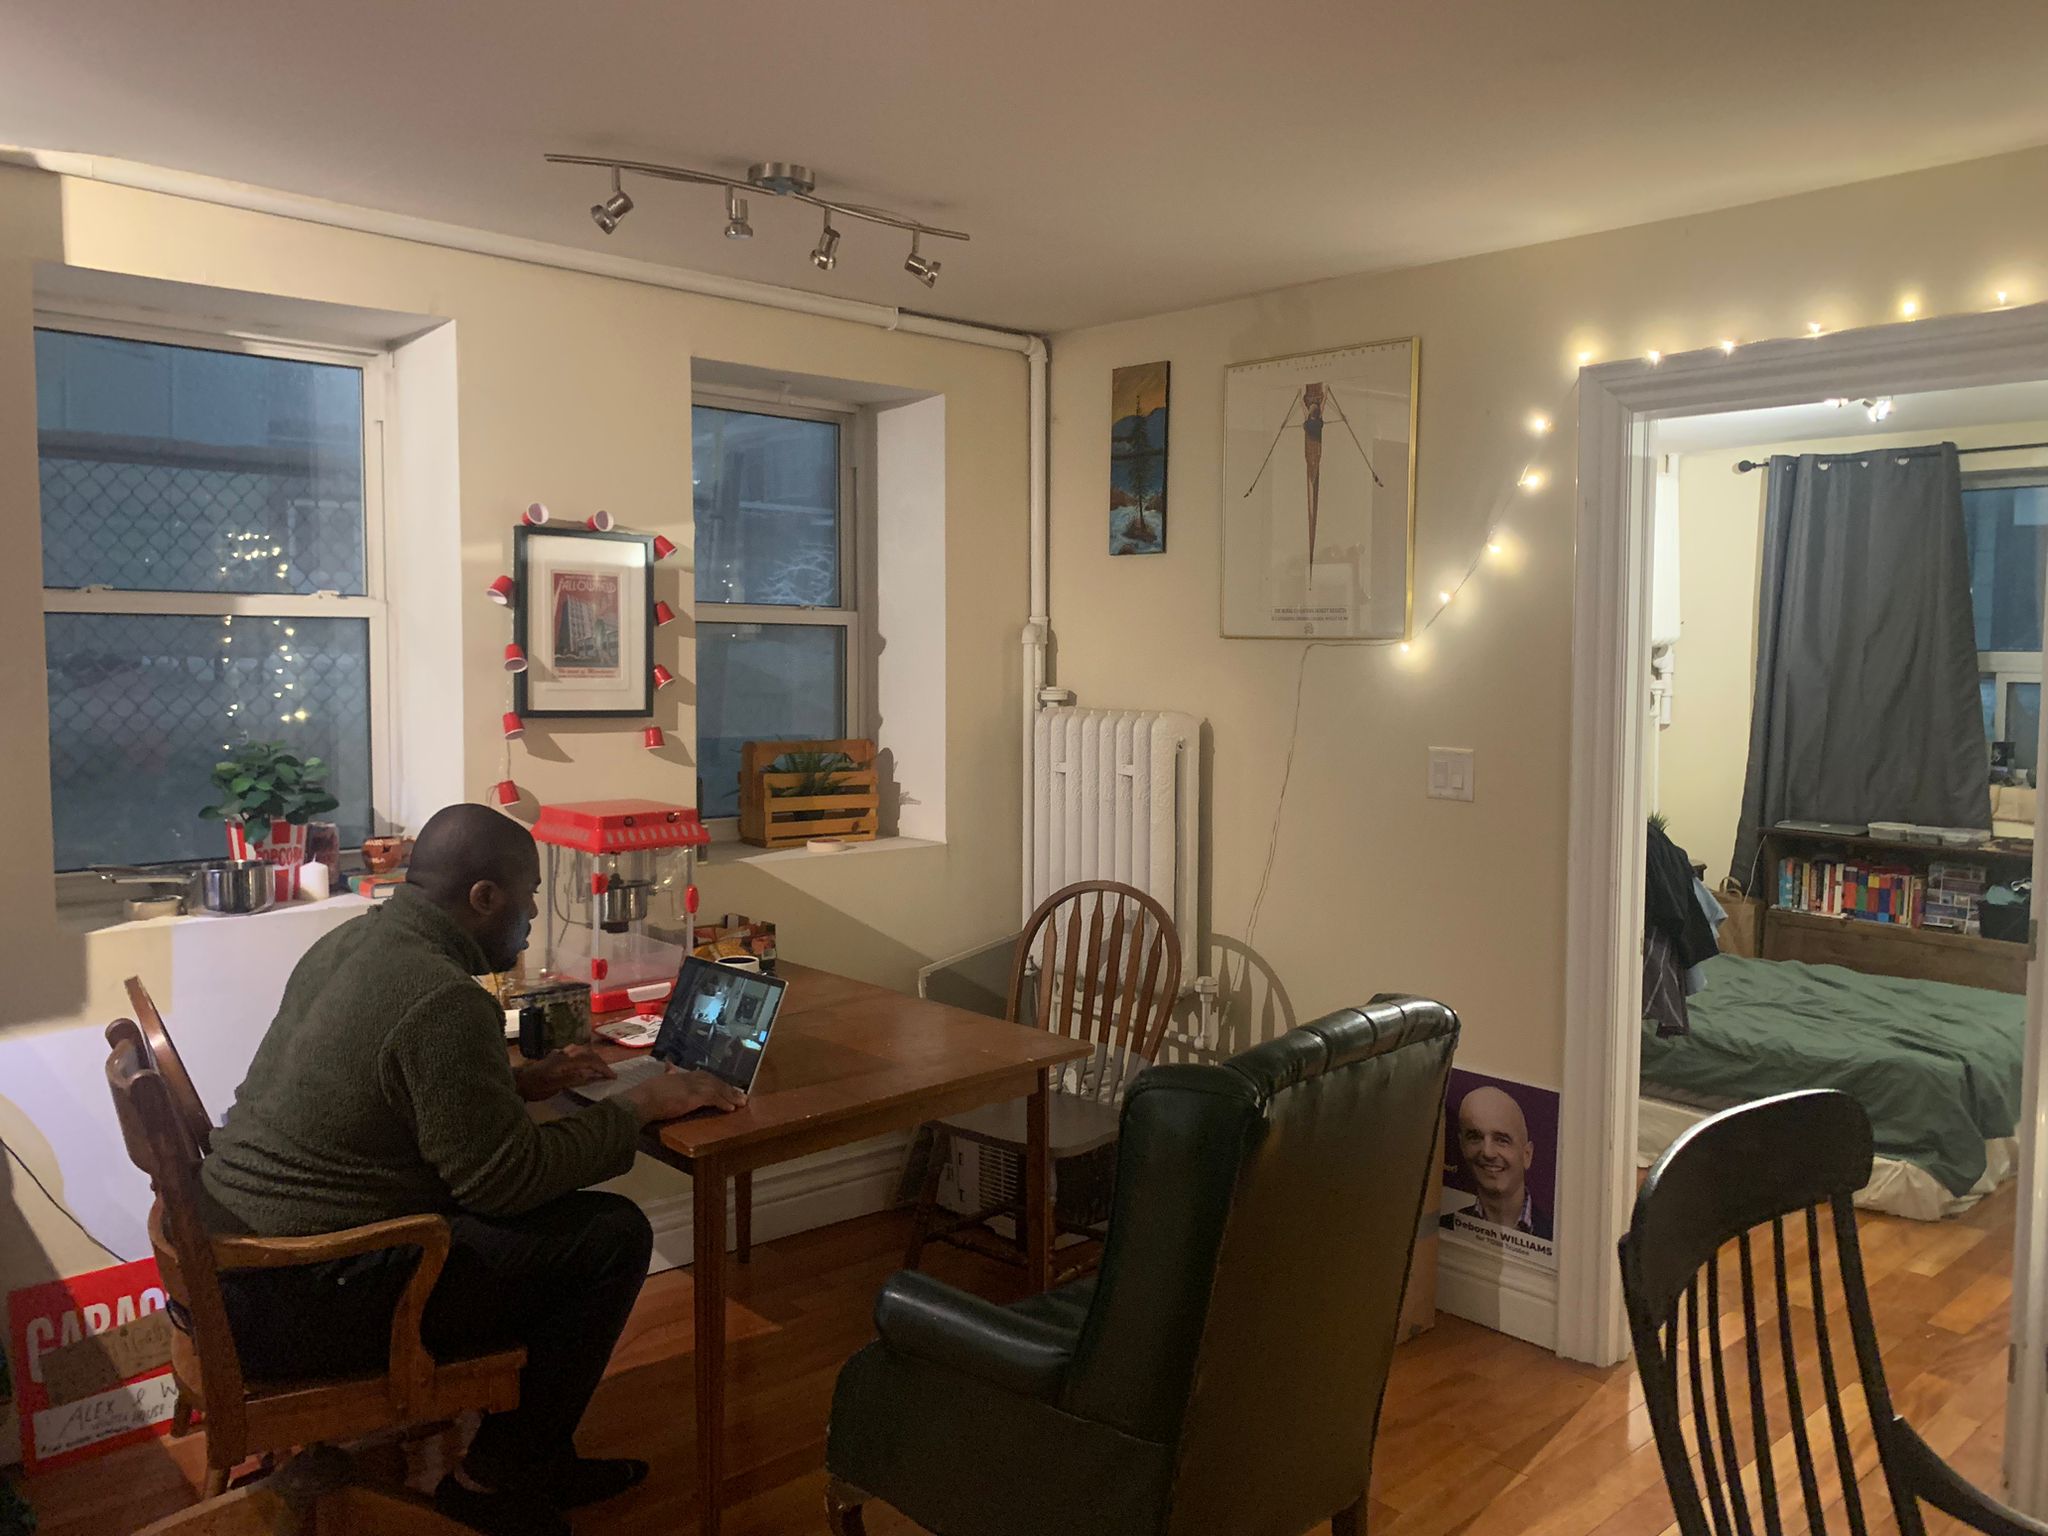 Photo taken by Alex Tredaway, showing his roommate watching Spotlight on a laptop screen in the same apartment where the some scenes from movie were shot